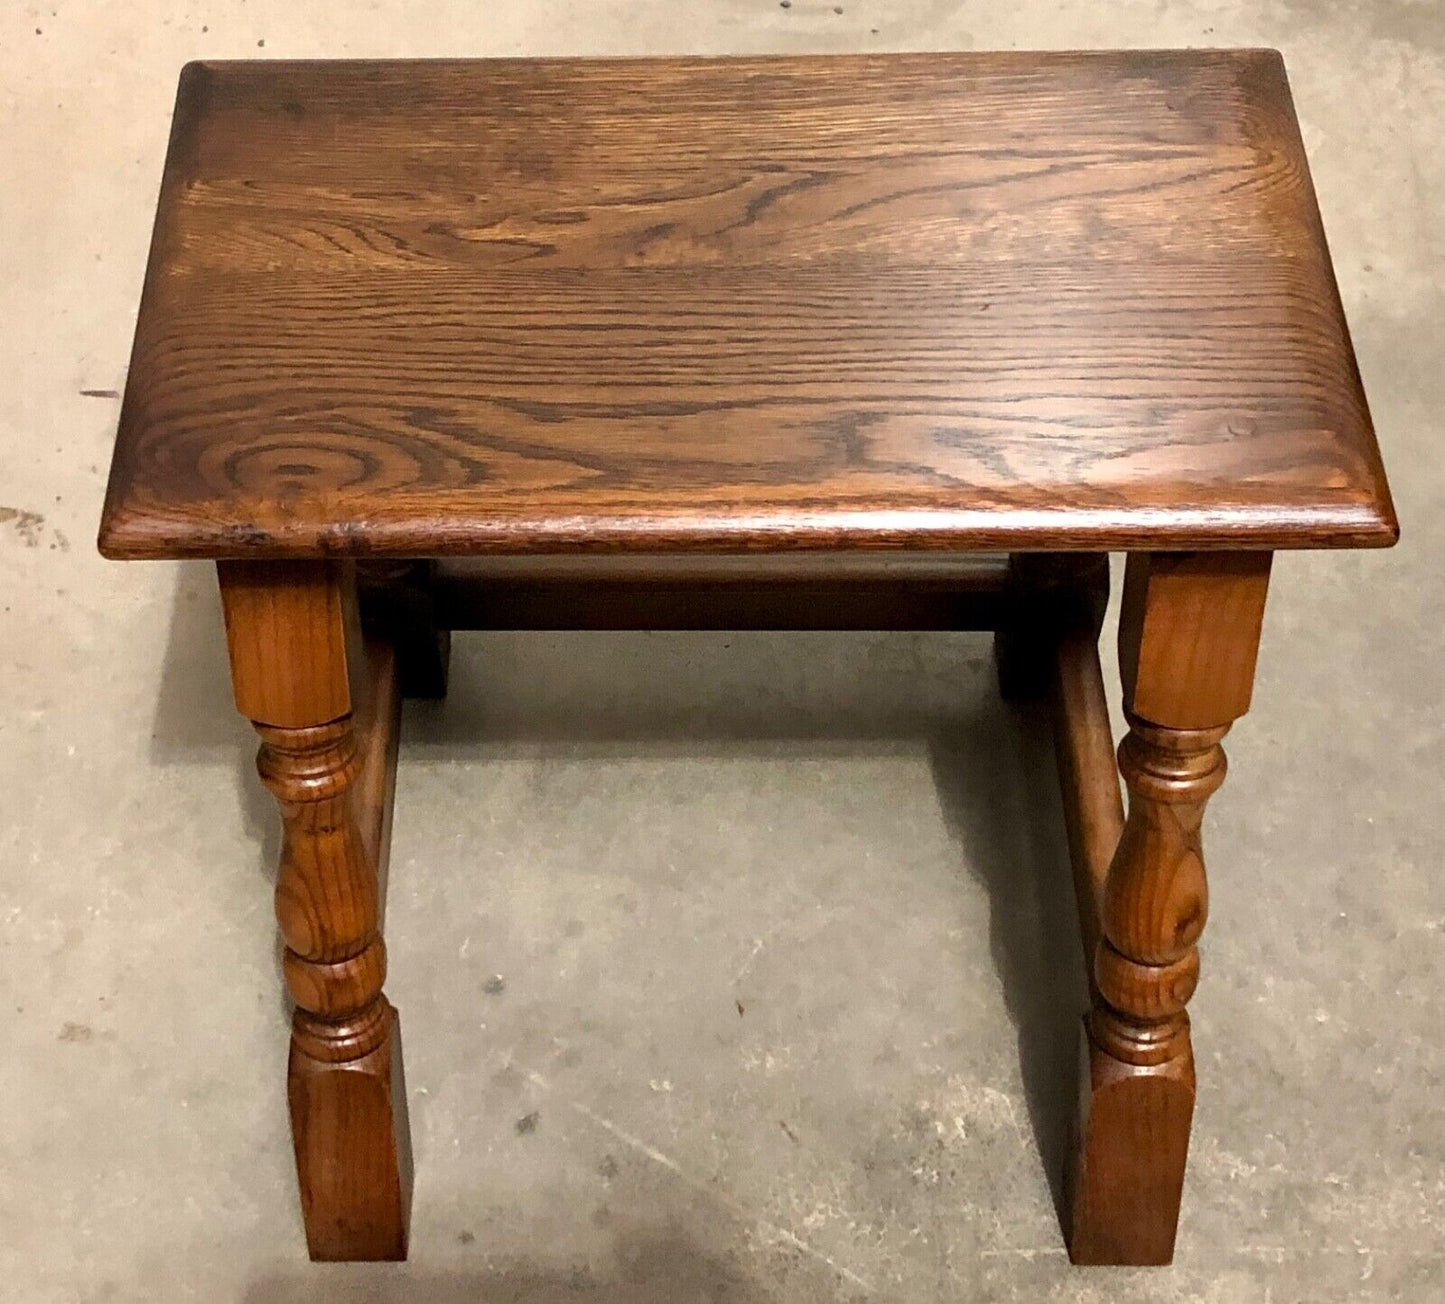 000825....Vintage Solid Oak Nest Of Tables / Coffee Tables ( sold )